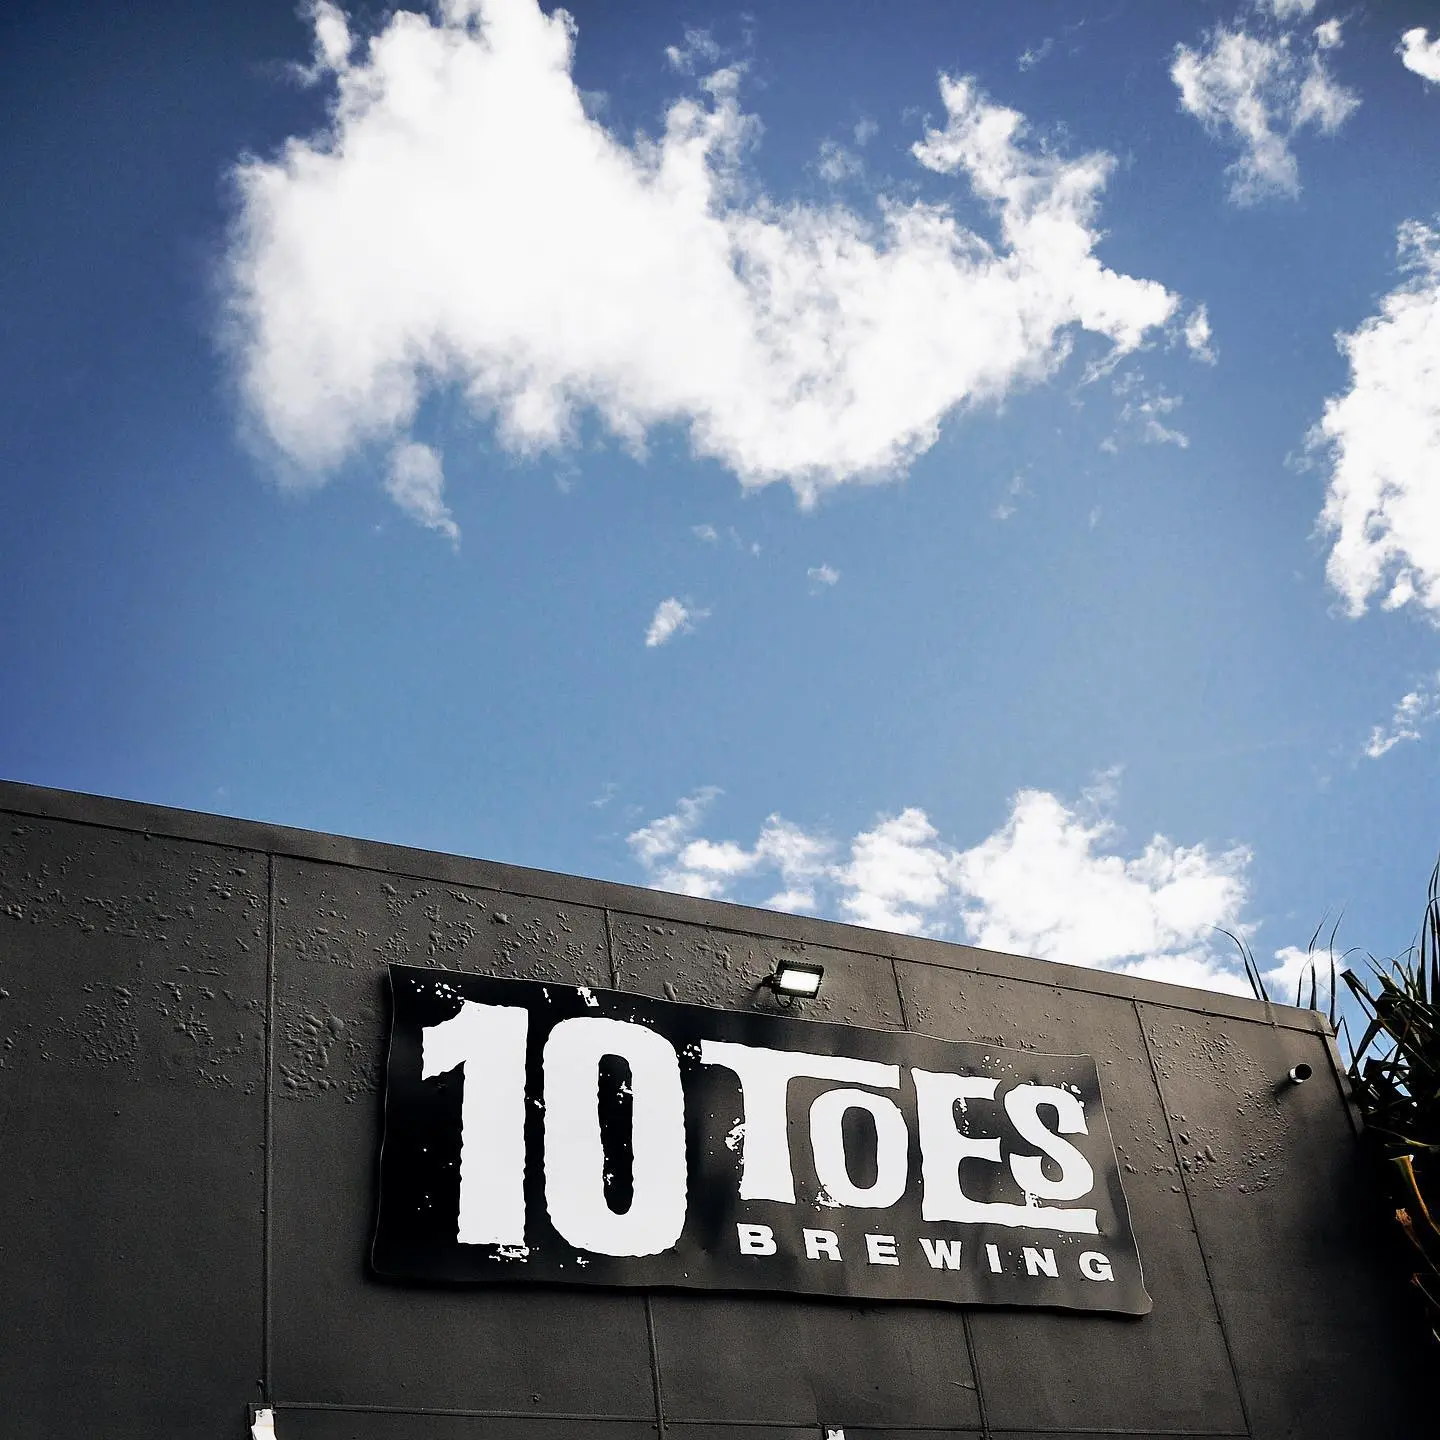 10 toes brewing 1